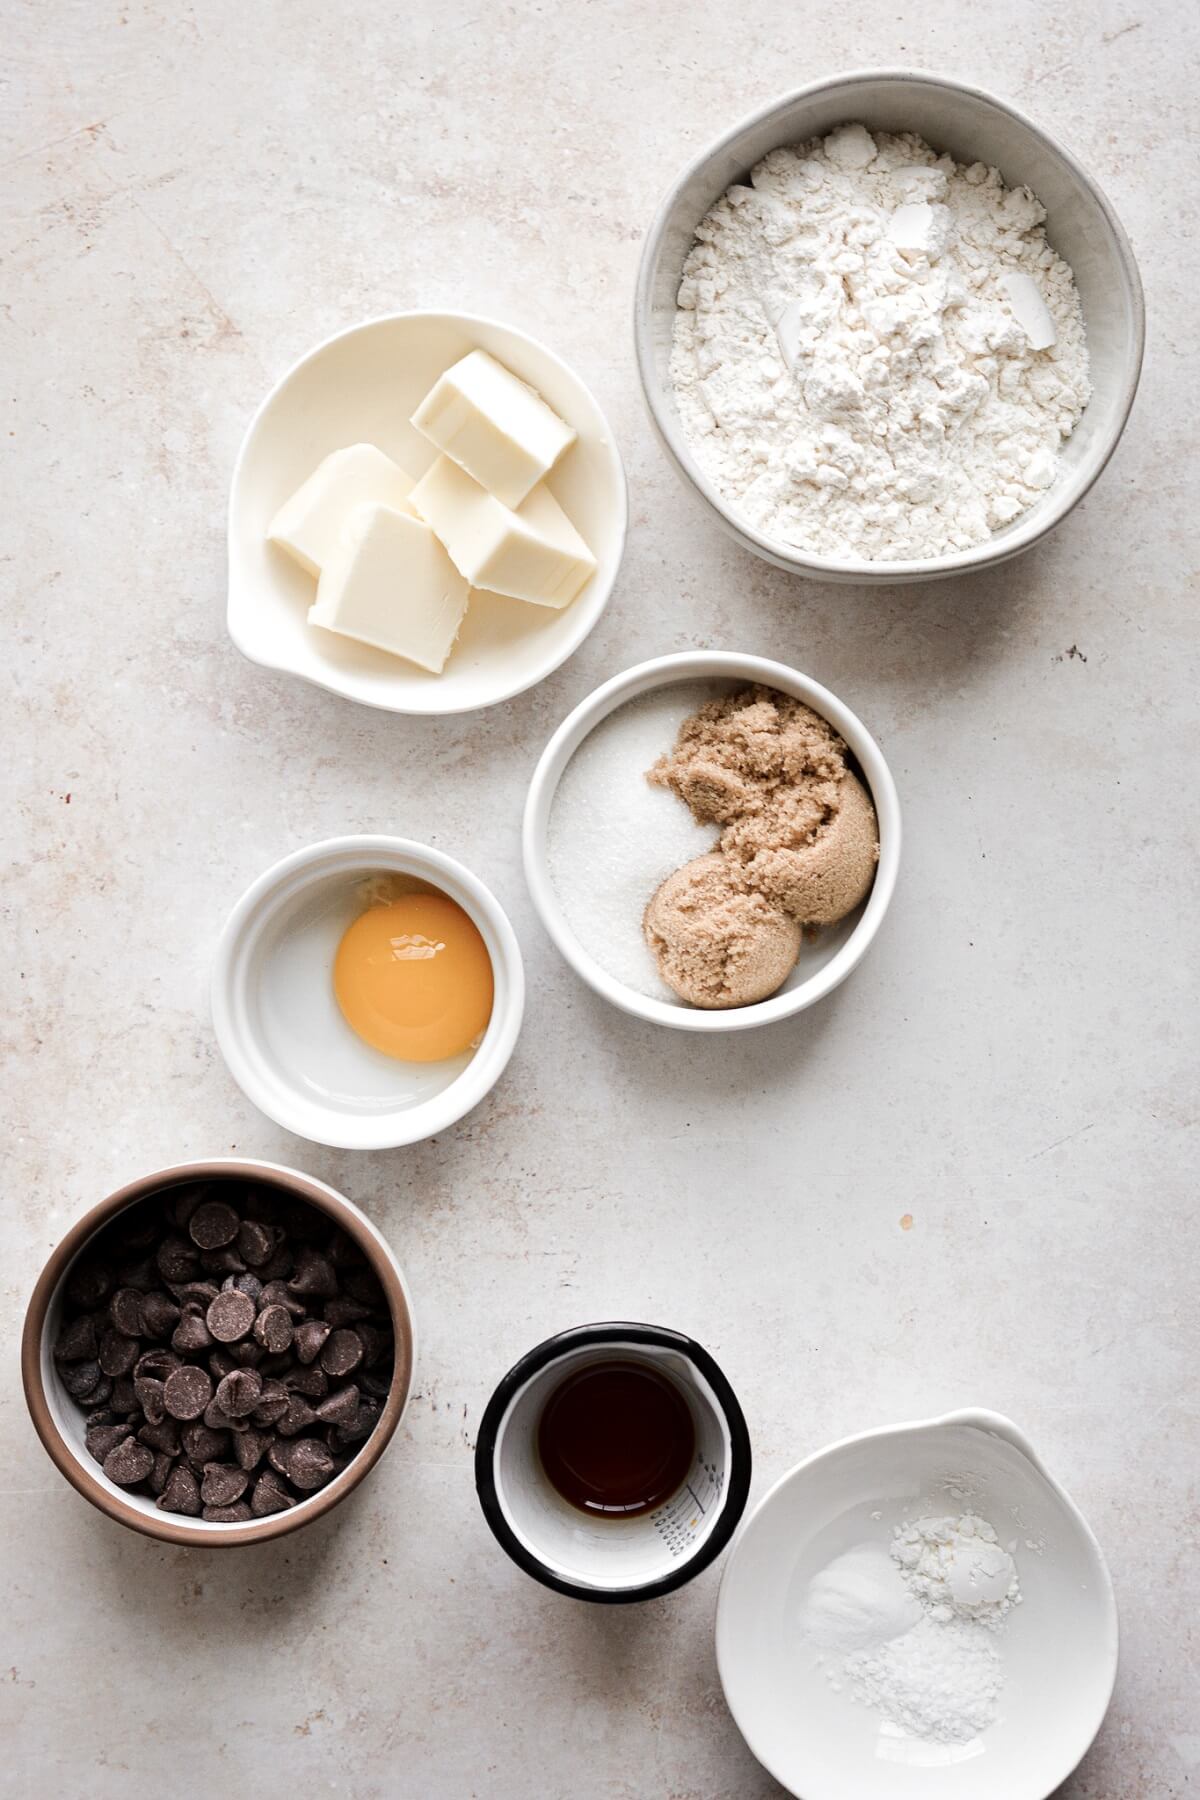 Ingredients to make two big chocolate chip cookies.